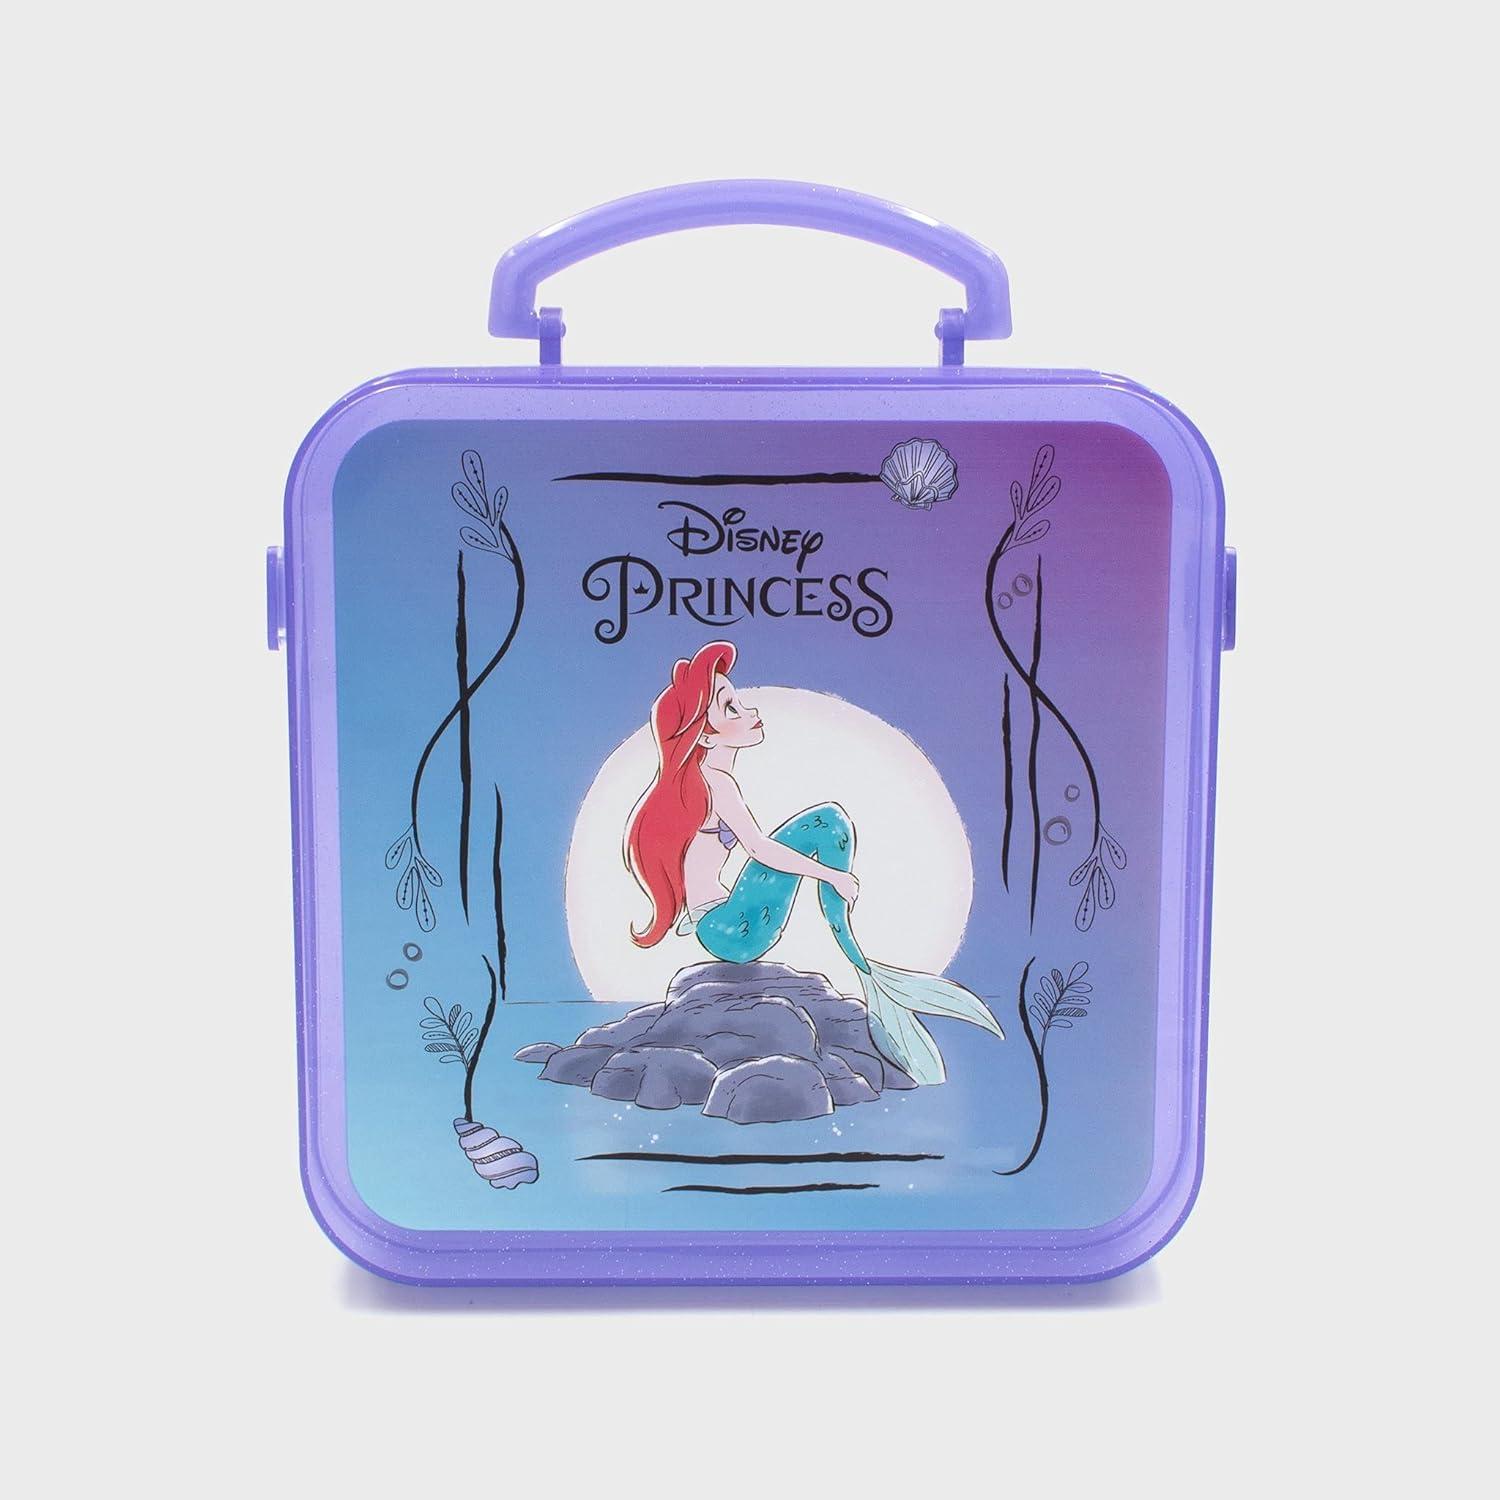 Disney Princess Little Mermaid Girls Collectible Gift box Bundle - Includes Lunch  Box Headband Bracelets Hair Clips Sunglasses Stickers and Pouch Great gift  box for girls Blue